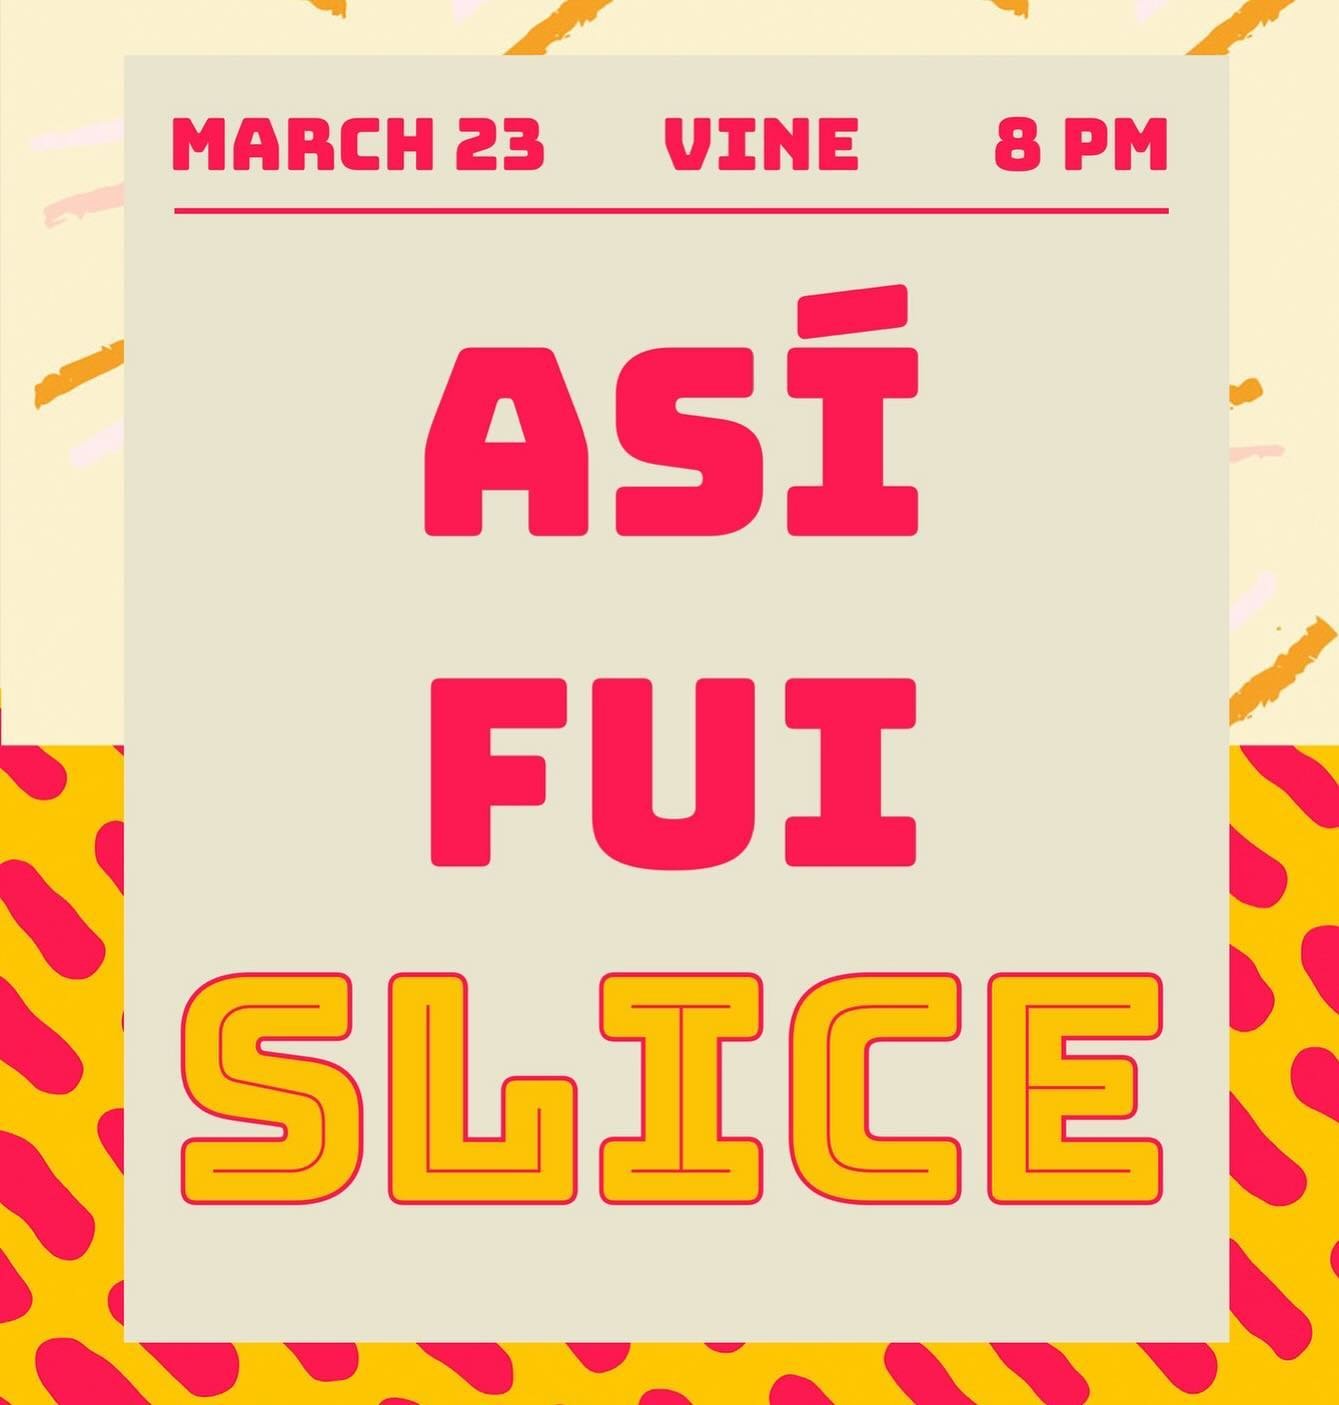 We&rsquo;ve been working on a couple new ones for our first set in a while! Come see us at @vine_lb alongside @asifui 3/23/24 8pm at vine

.

.

.

#longbeachmusic #sliceband #clubbitch #localmusic #longbeachmusicscene #playlist #longbeachca #longbea